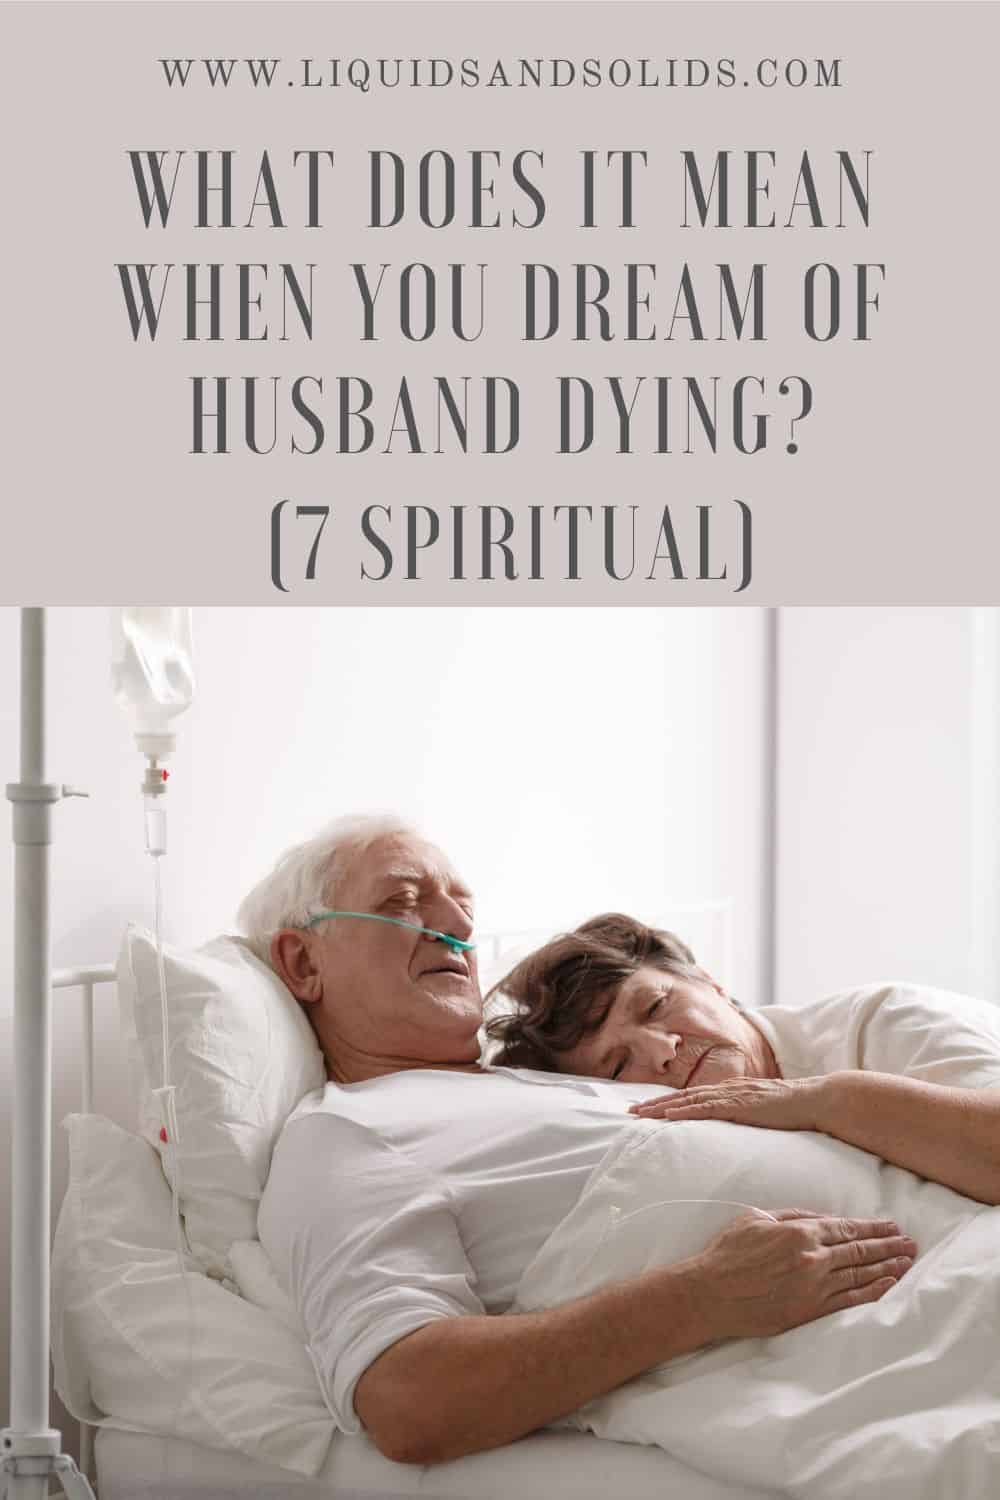 What Does It Mean When You Dream Of Husband Dying (7 Spiritual)